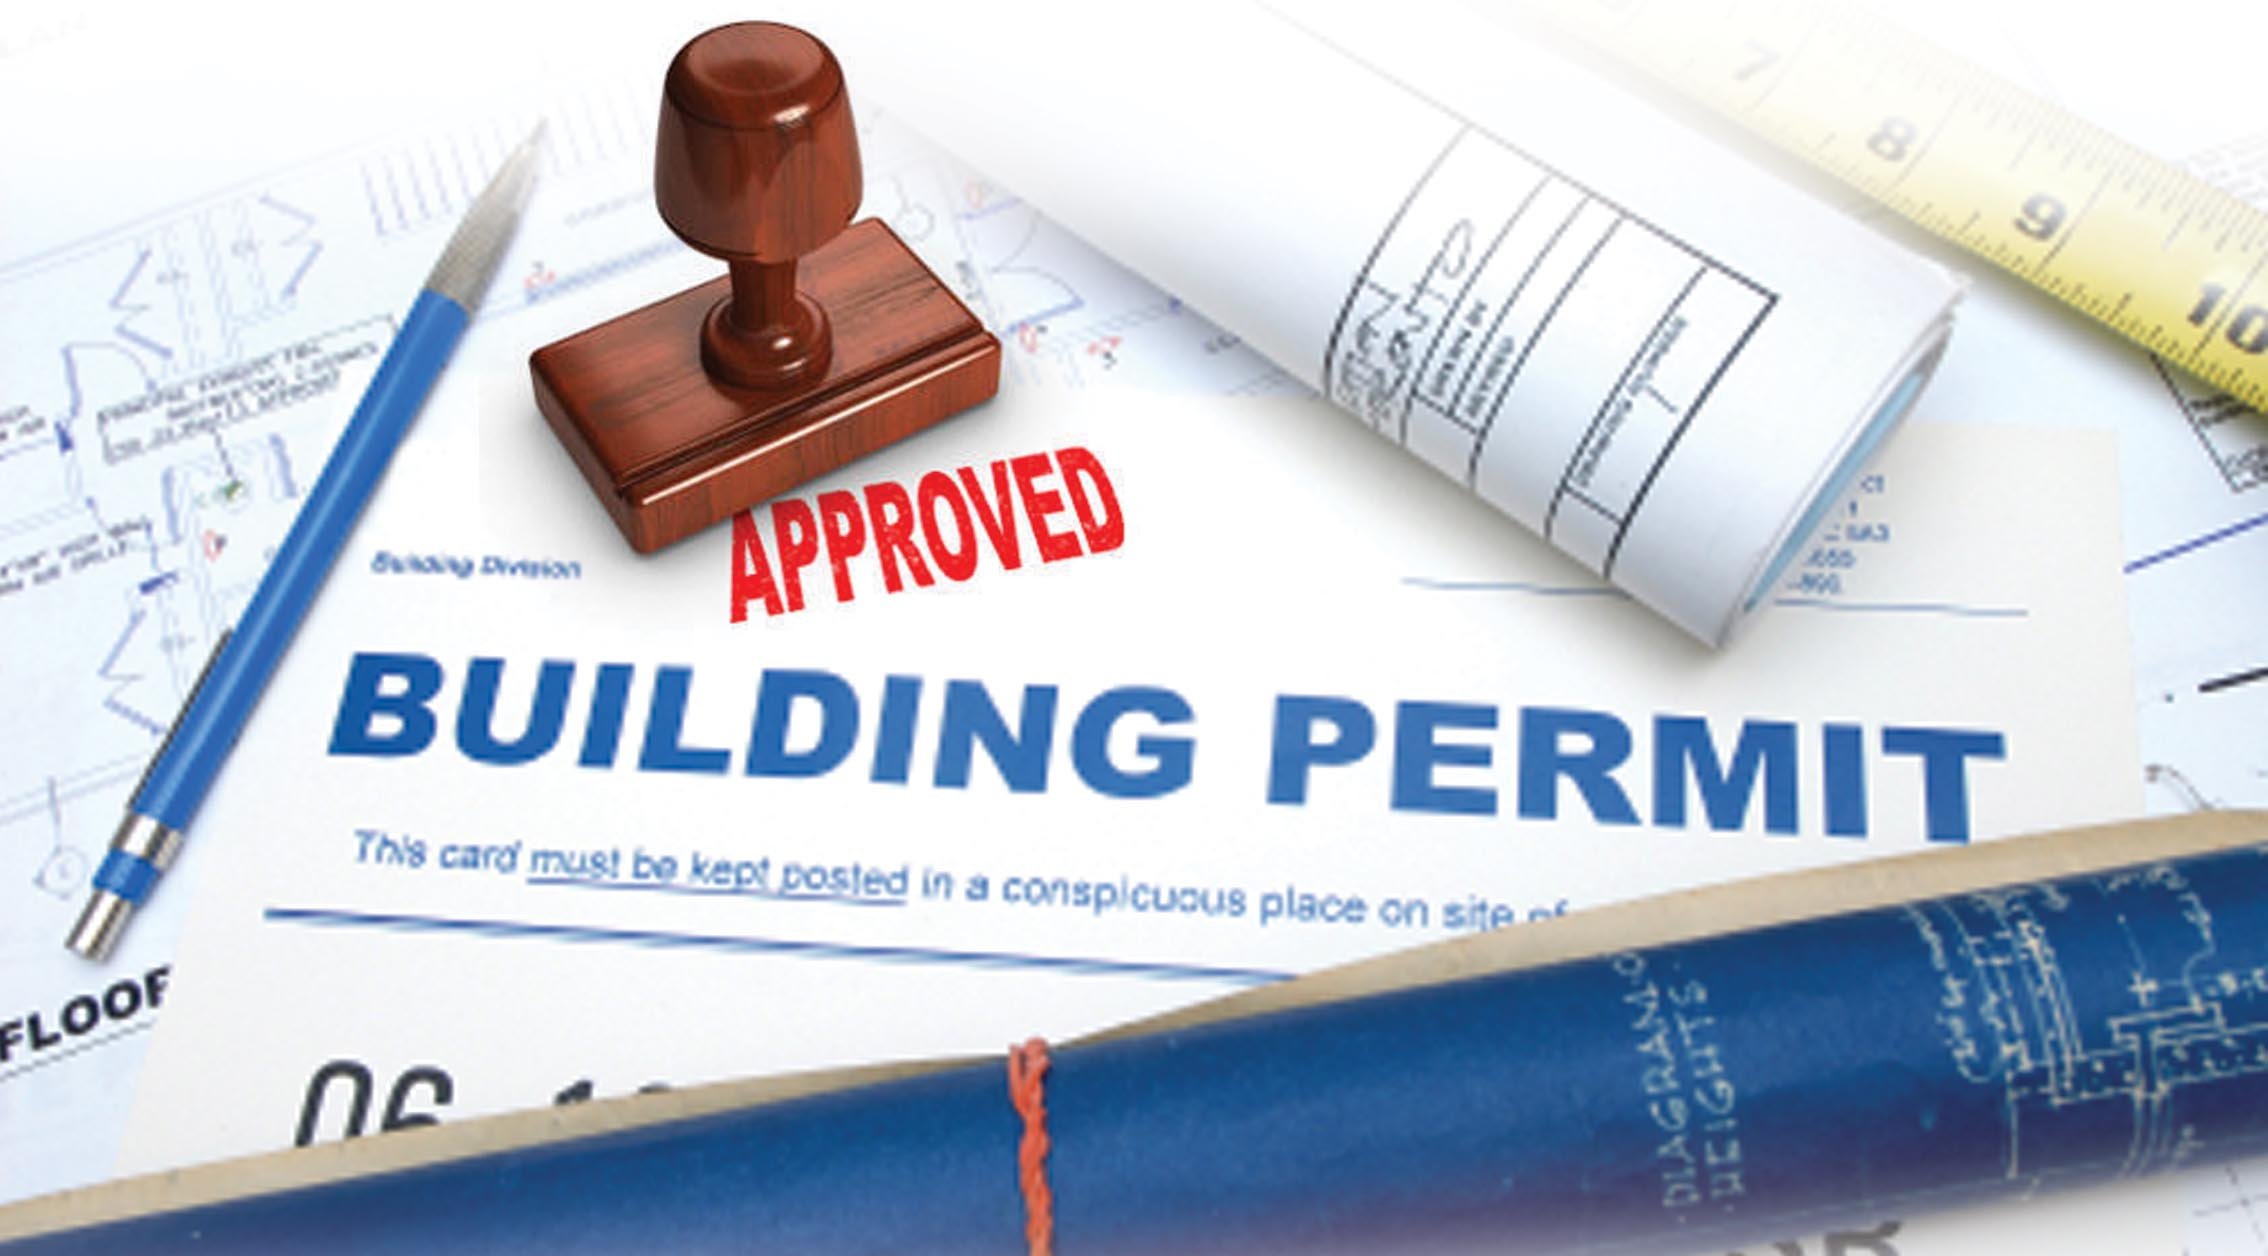 What is the purpose of having a construction permit